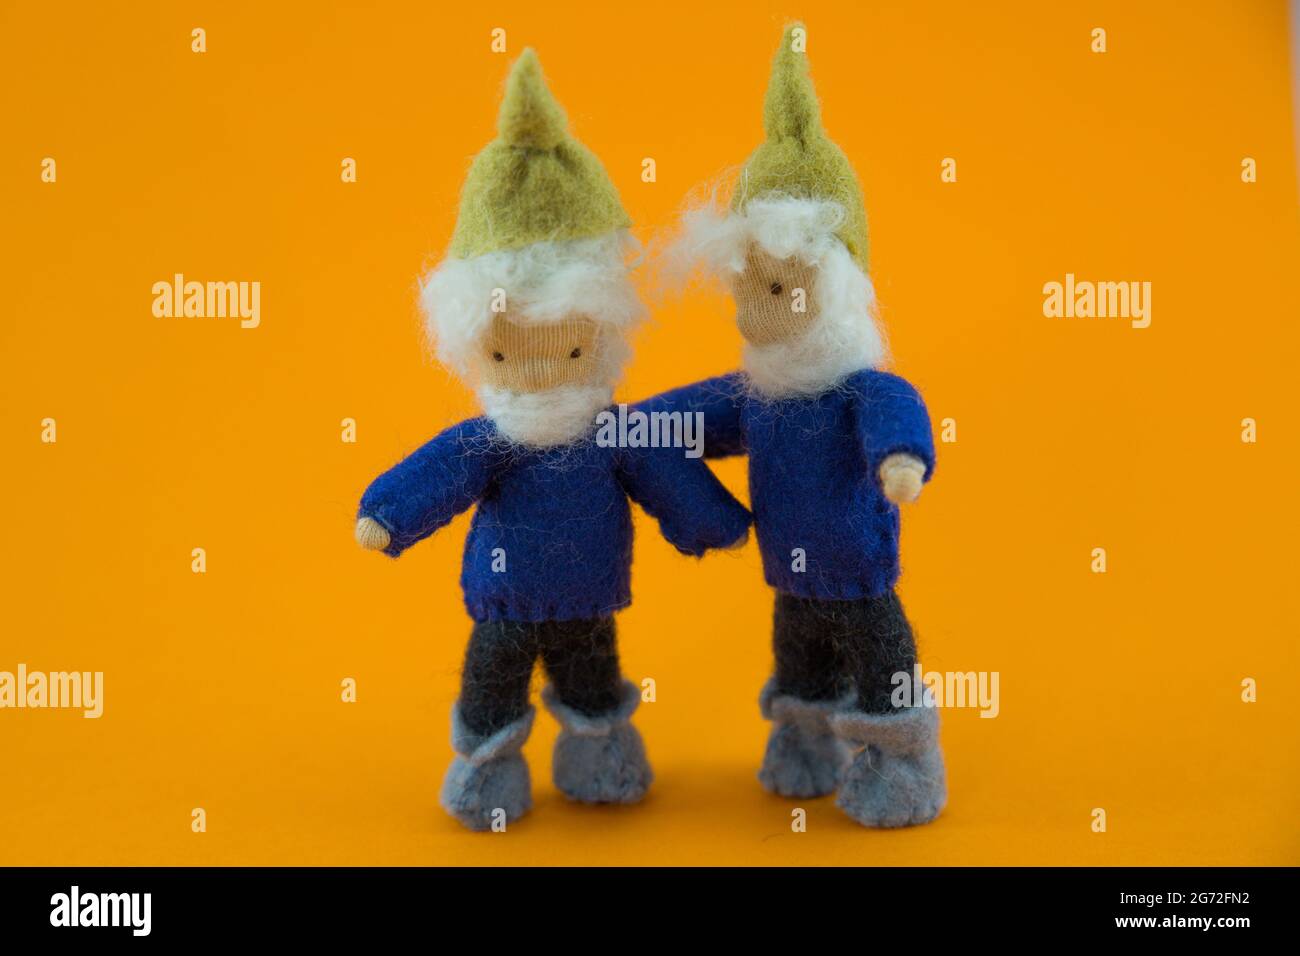 Two knitted fictional characters - dwarves dressed in blue with a bright orange background Stock Photo